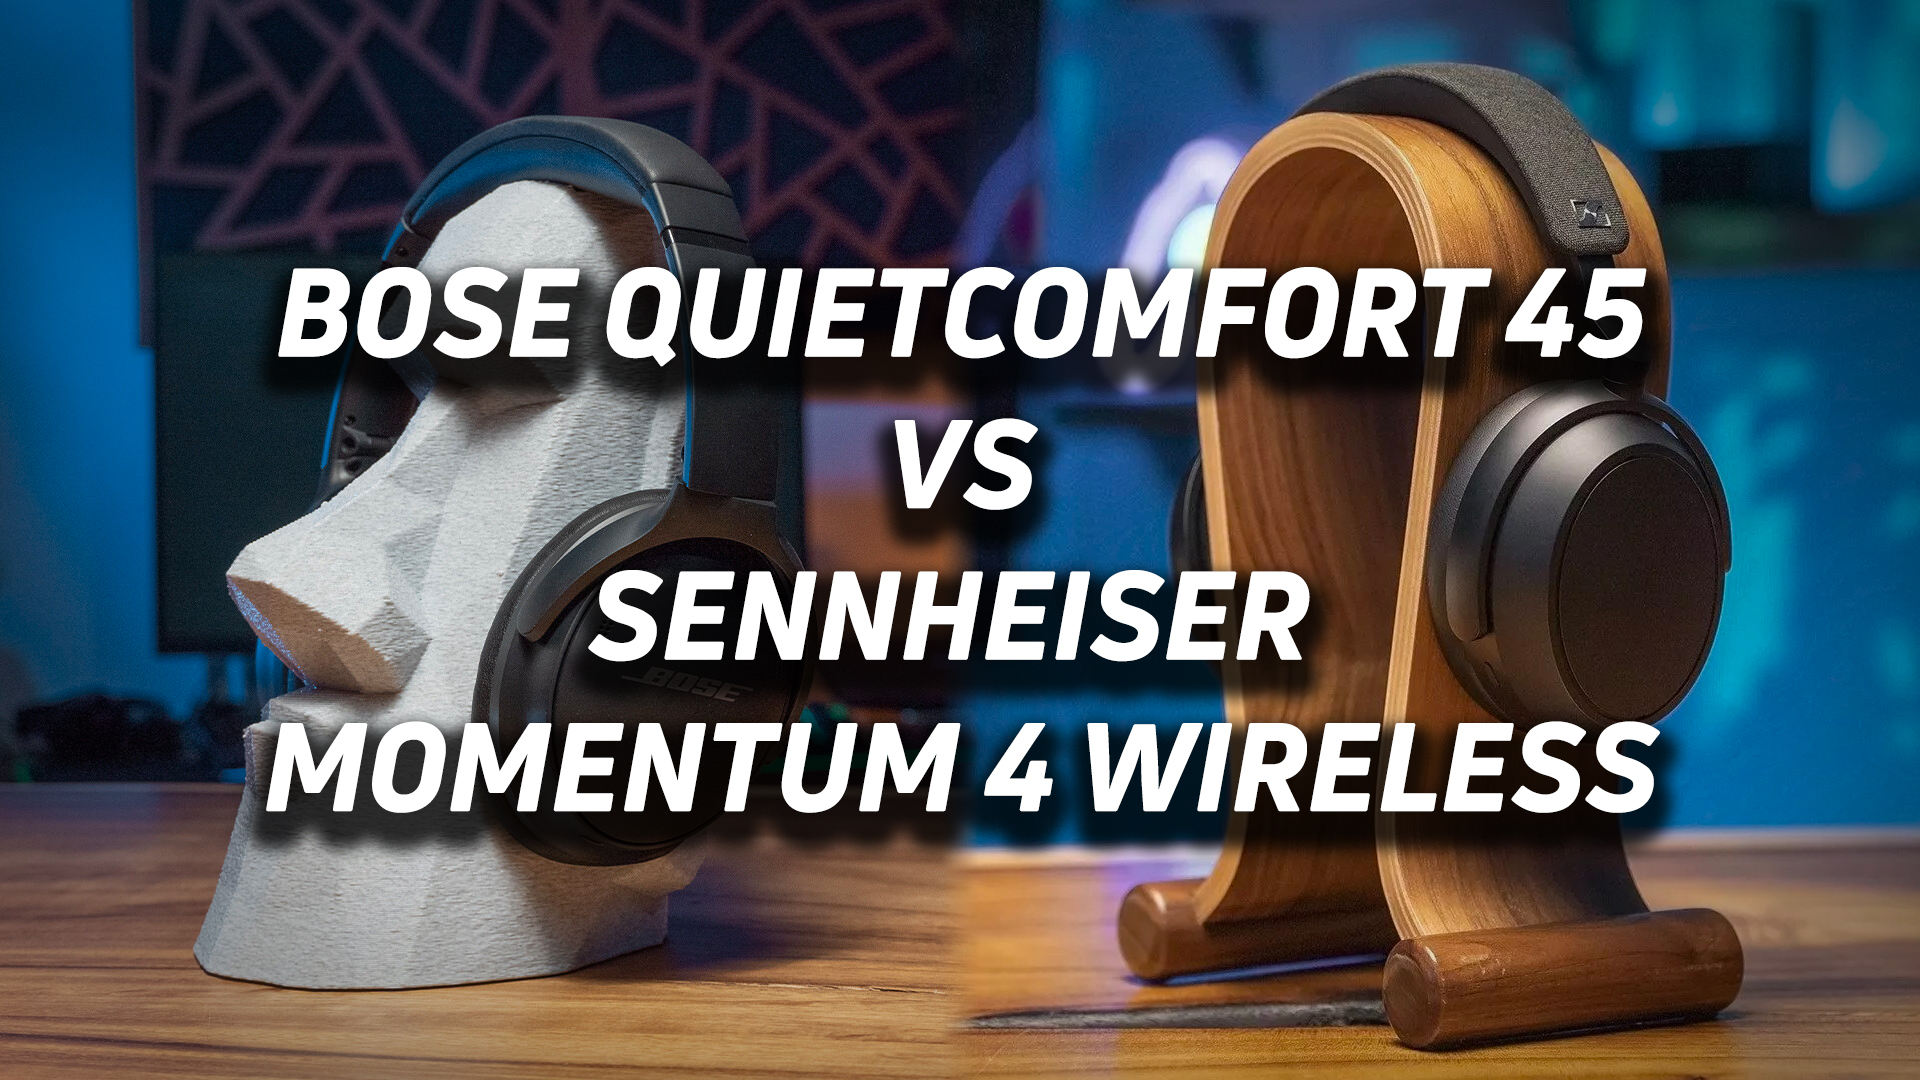 The feature image for the Bose QuietComfort 45 vs Sennheiser MOMENTUM 4 Wireless.